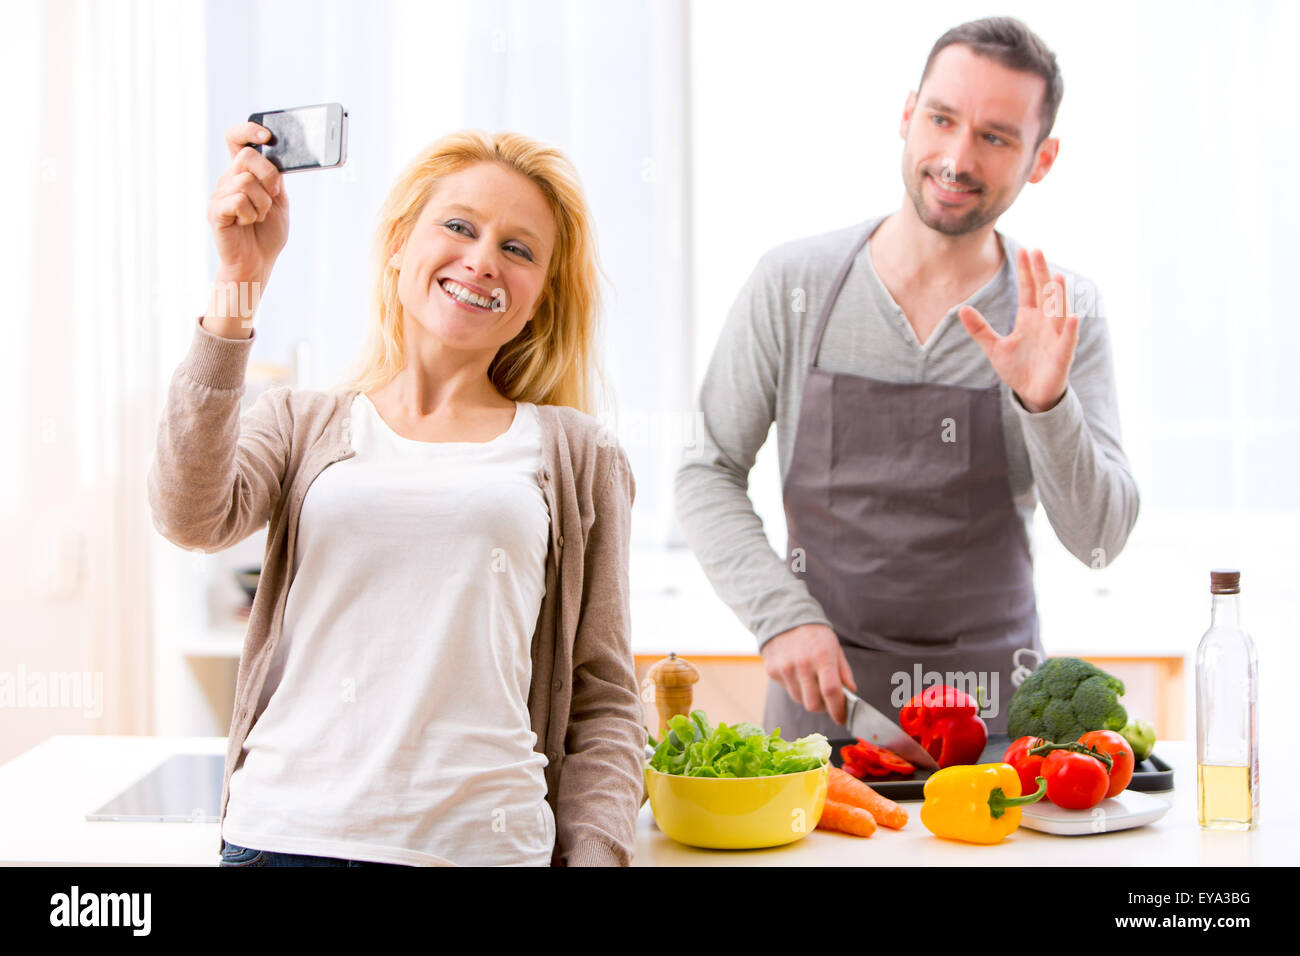 View of a Young attractive woman taking selfie in kitchen Stock Photo